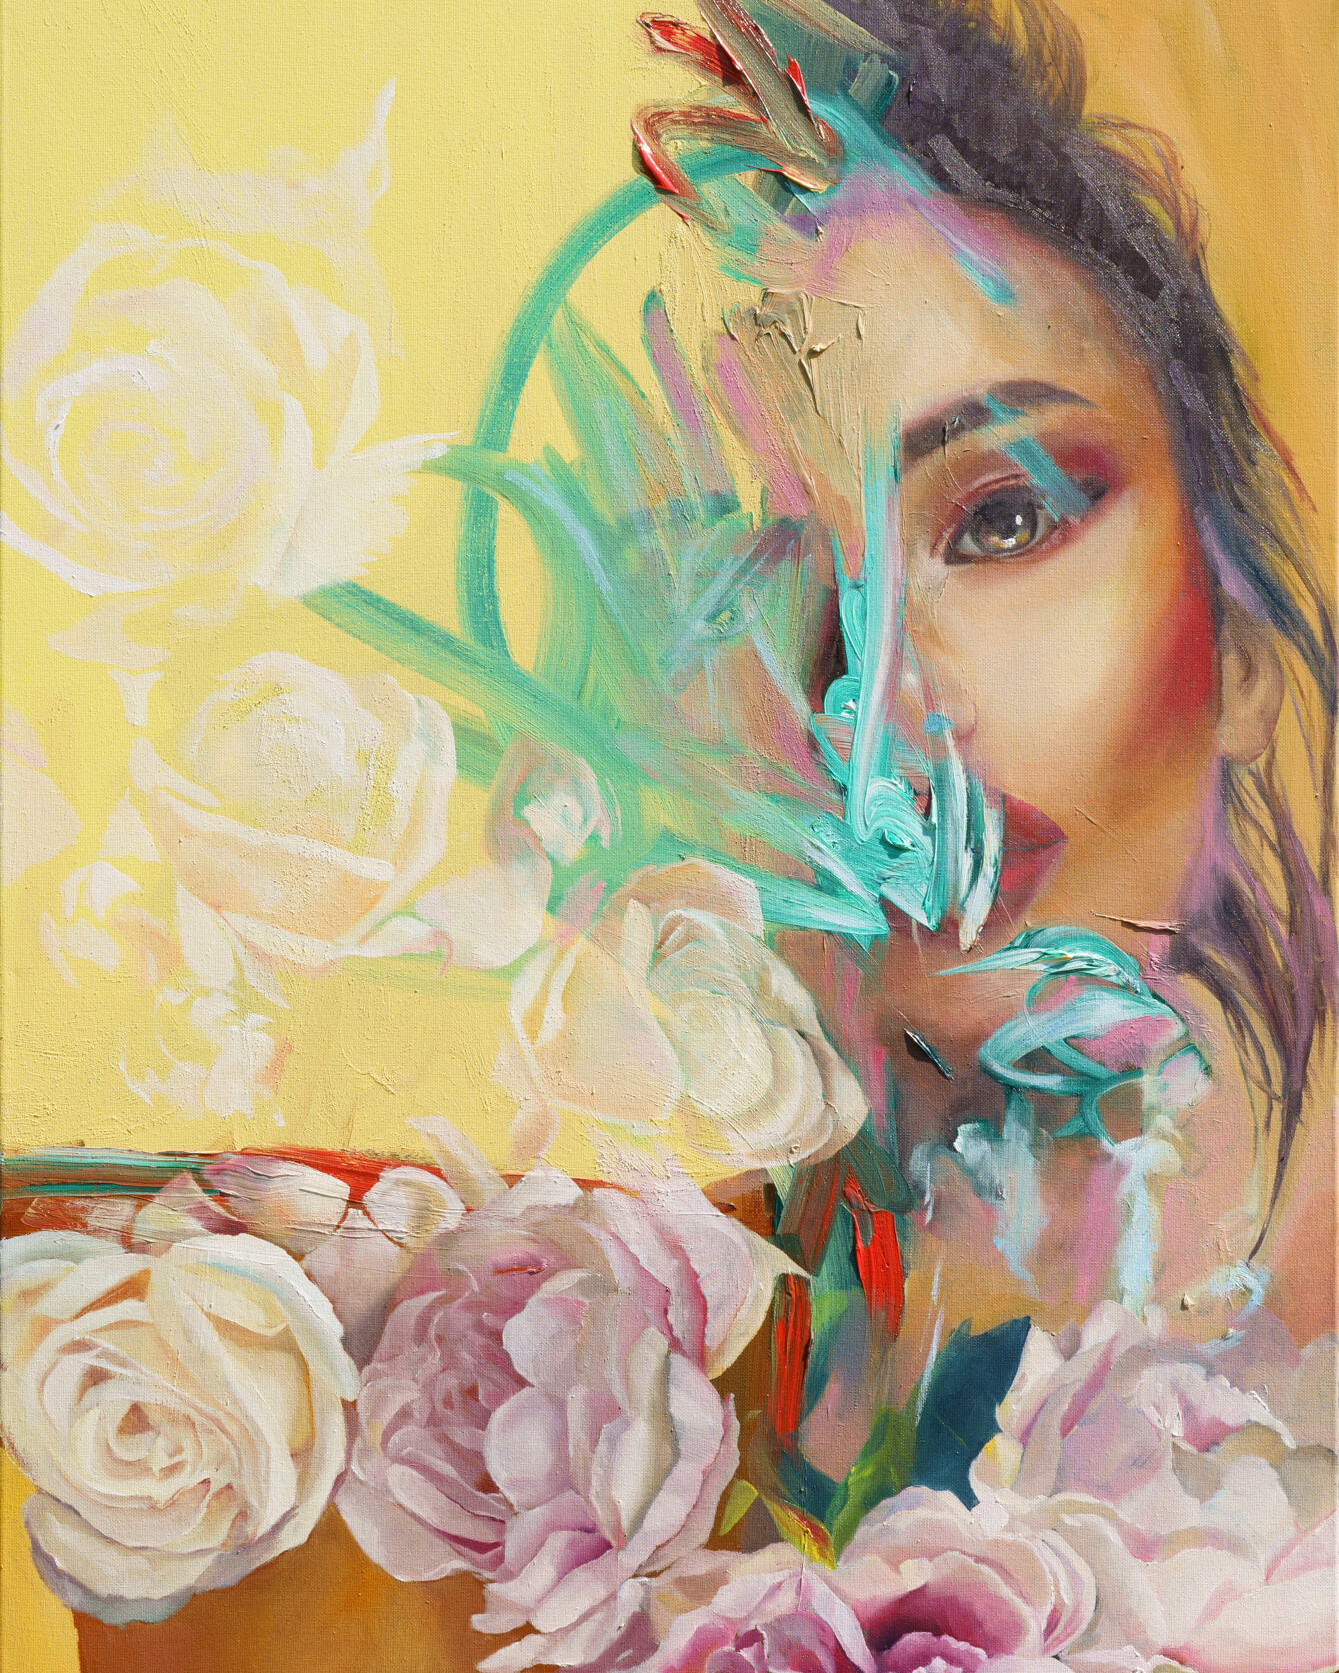 Oil painting by Alex Righetto, part of the 'Perfectly Imperfect' collection, showcasing a woman's portrait with abstract elements.